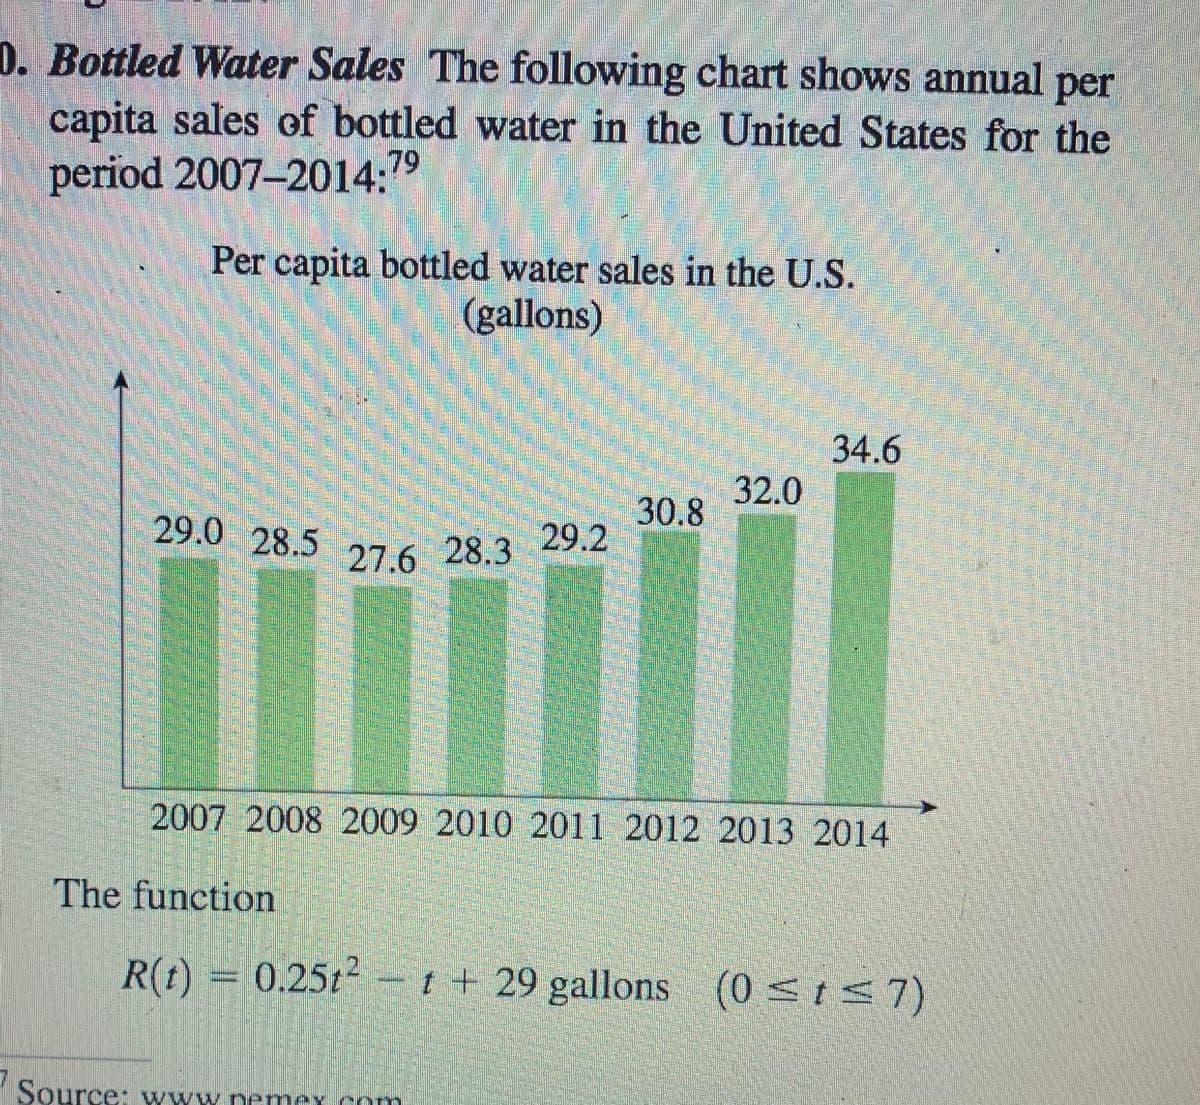 D. Bottled Water Sales The following chart shows annual per
capita sales of bottled water in the United States for the
period 2007-2014:79
Per capita bottled water sales in the U.S.
(gallons)
34.6
32.0
29.0 28.5
30.8
29.2
27.6 28.3
2007 2008 2009 2010 2011 2012 2013 2014
The function
R(t) = 0.25t² -t+ 29 gallons (0 <t<7)
Source: www.nemex com
